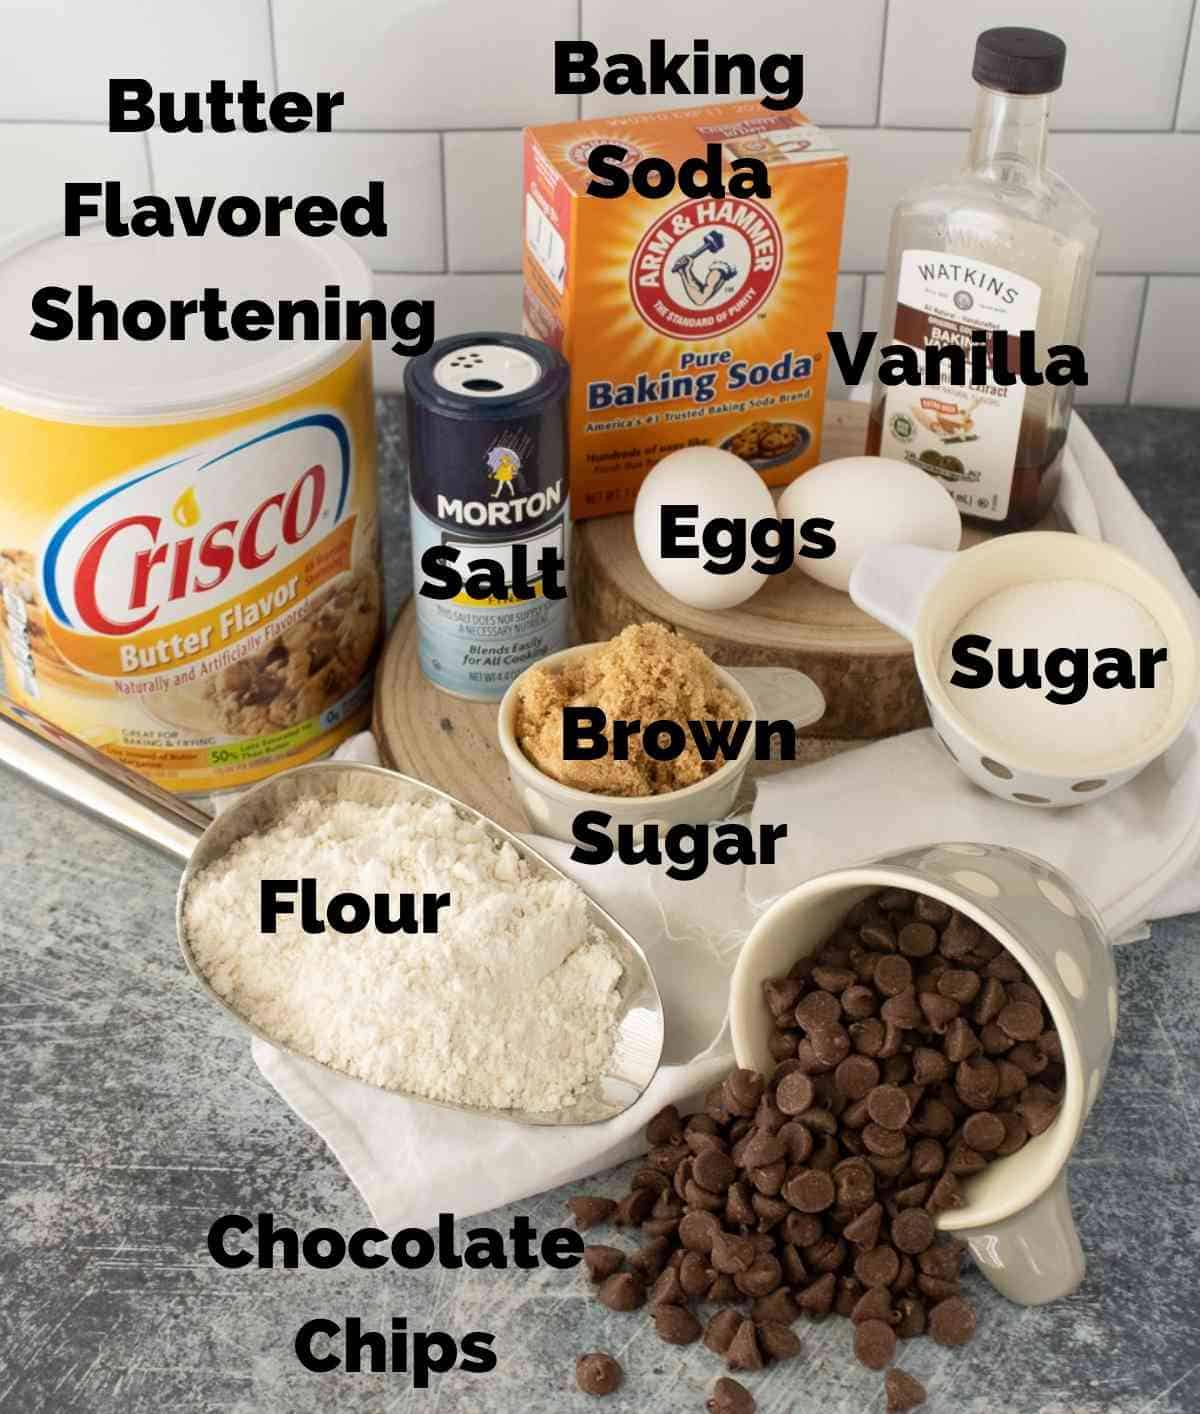 Ingredients for Chocolate Chip Cookies.